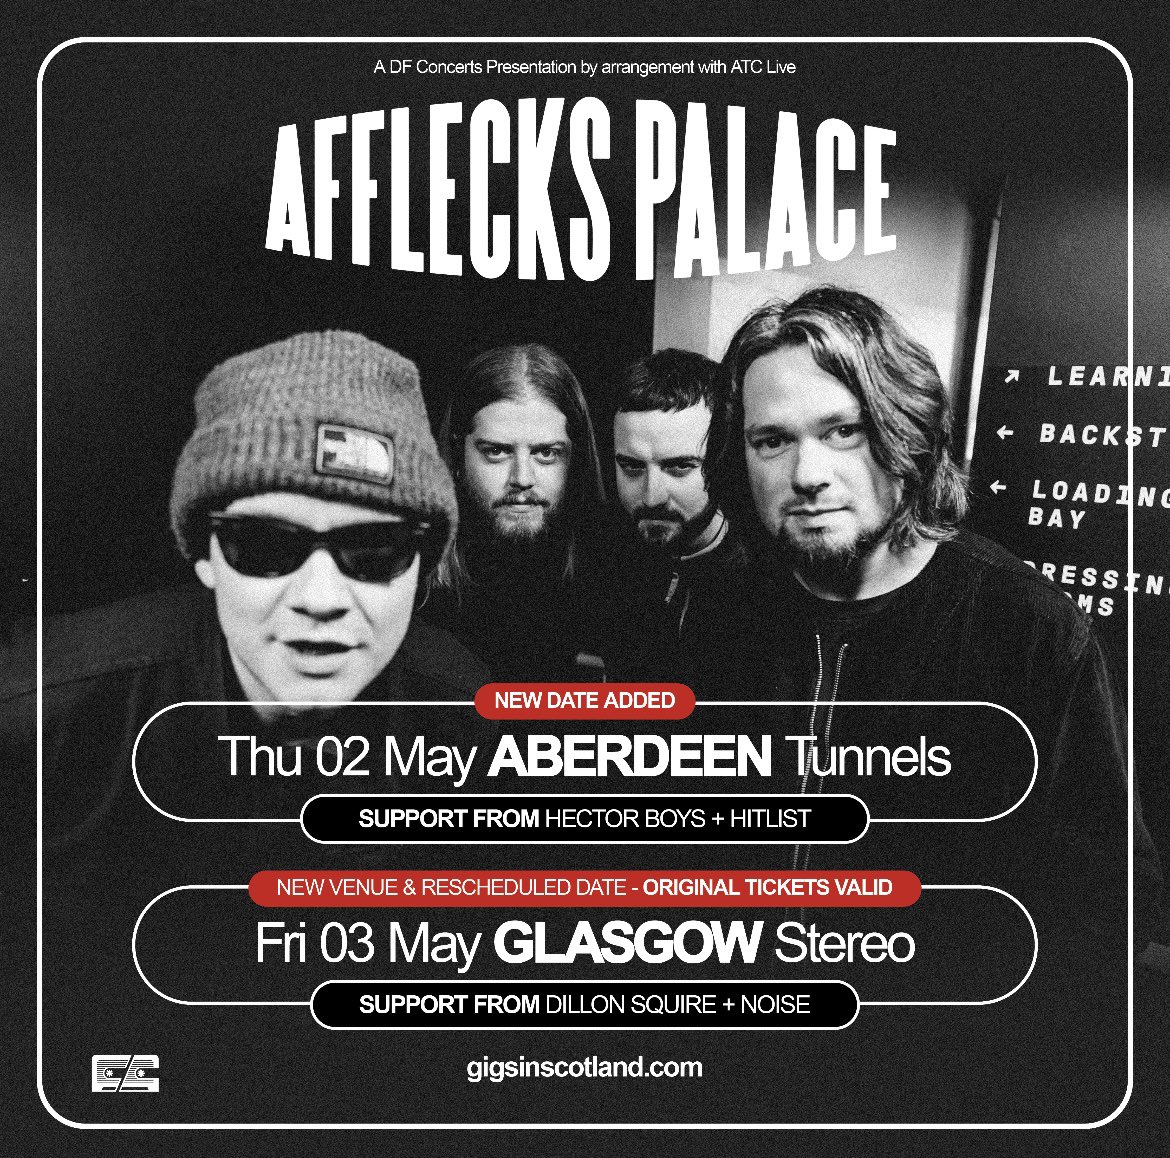 2nd of May sees us support @affleckspalace at @thetunnelsab alongside @hectorboys_band Buzzing to play alongside these lot and may or may not be debuting a new single🫵 @gigsinscotland TICKET LINK IN BIO